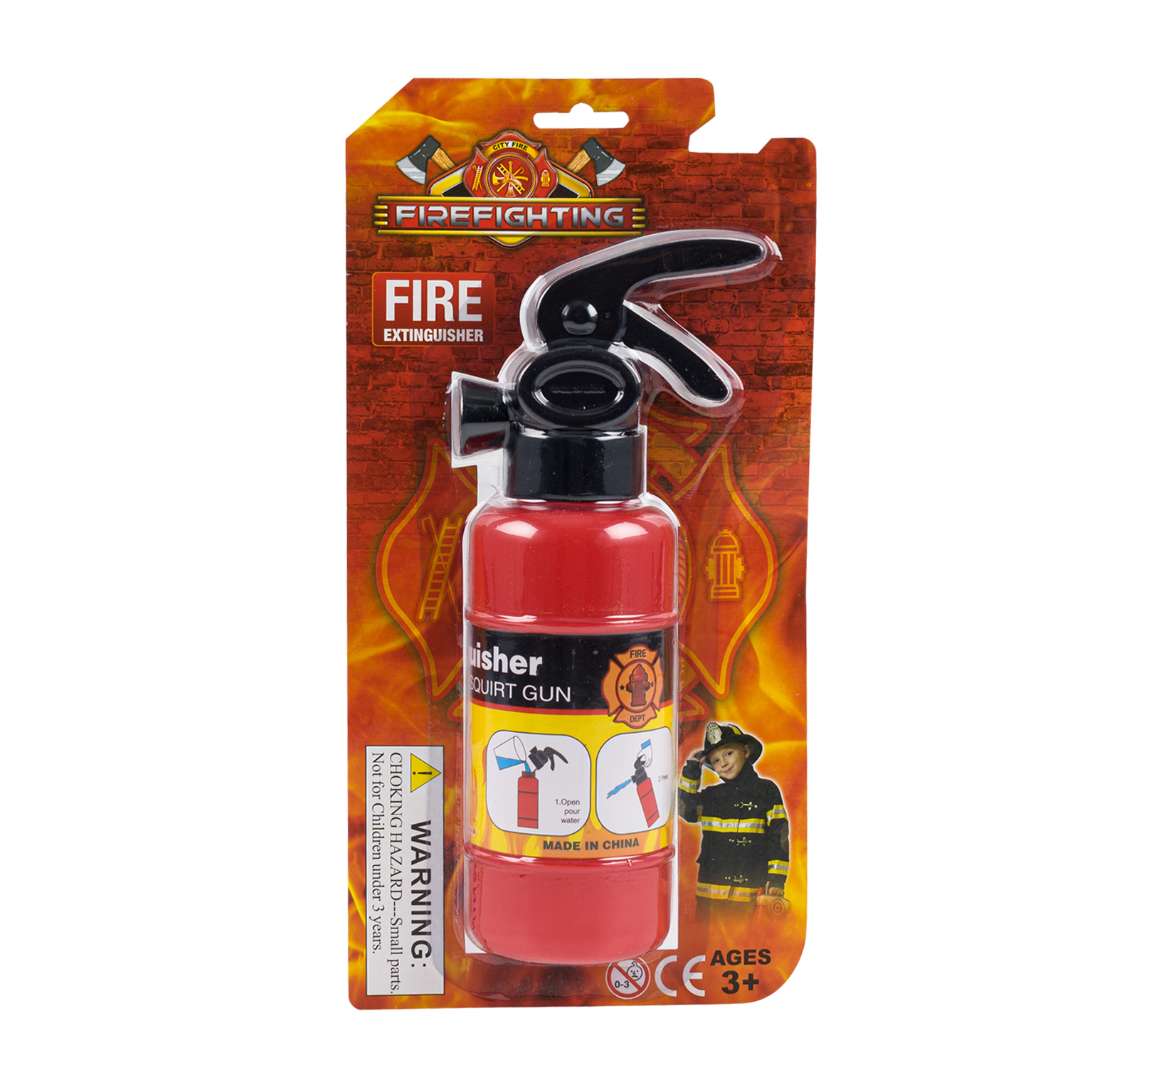 Wholesale Toy Fire Extinguishers - Red, Black, Peggable, Ages 3+